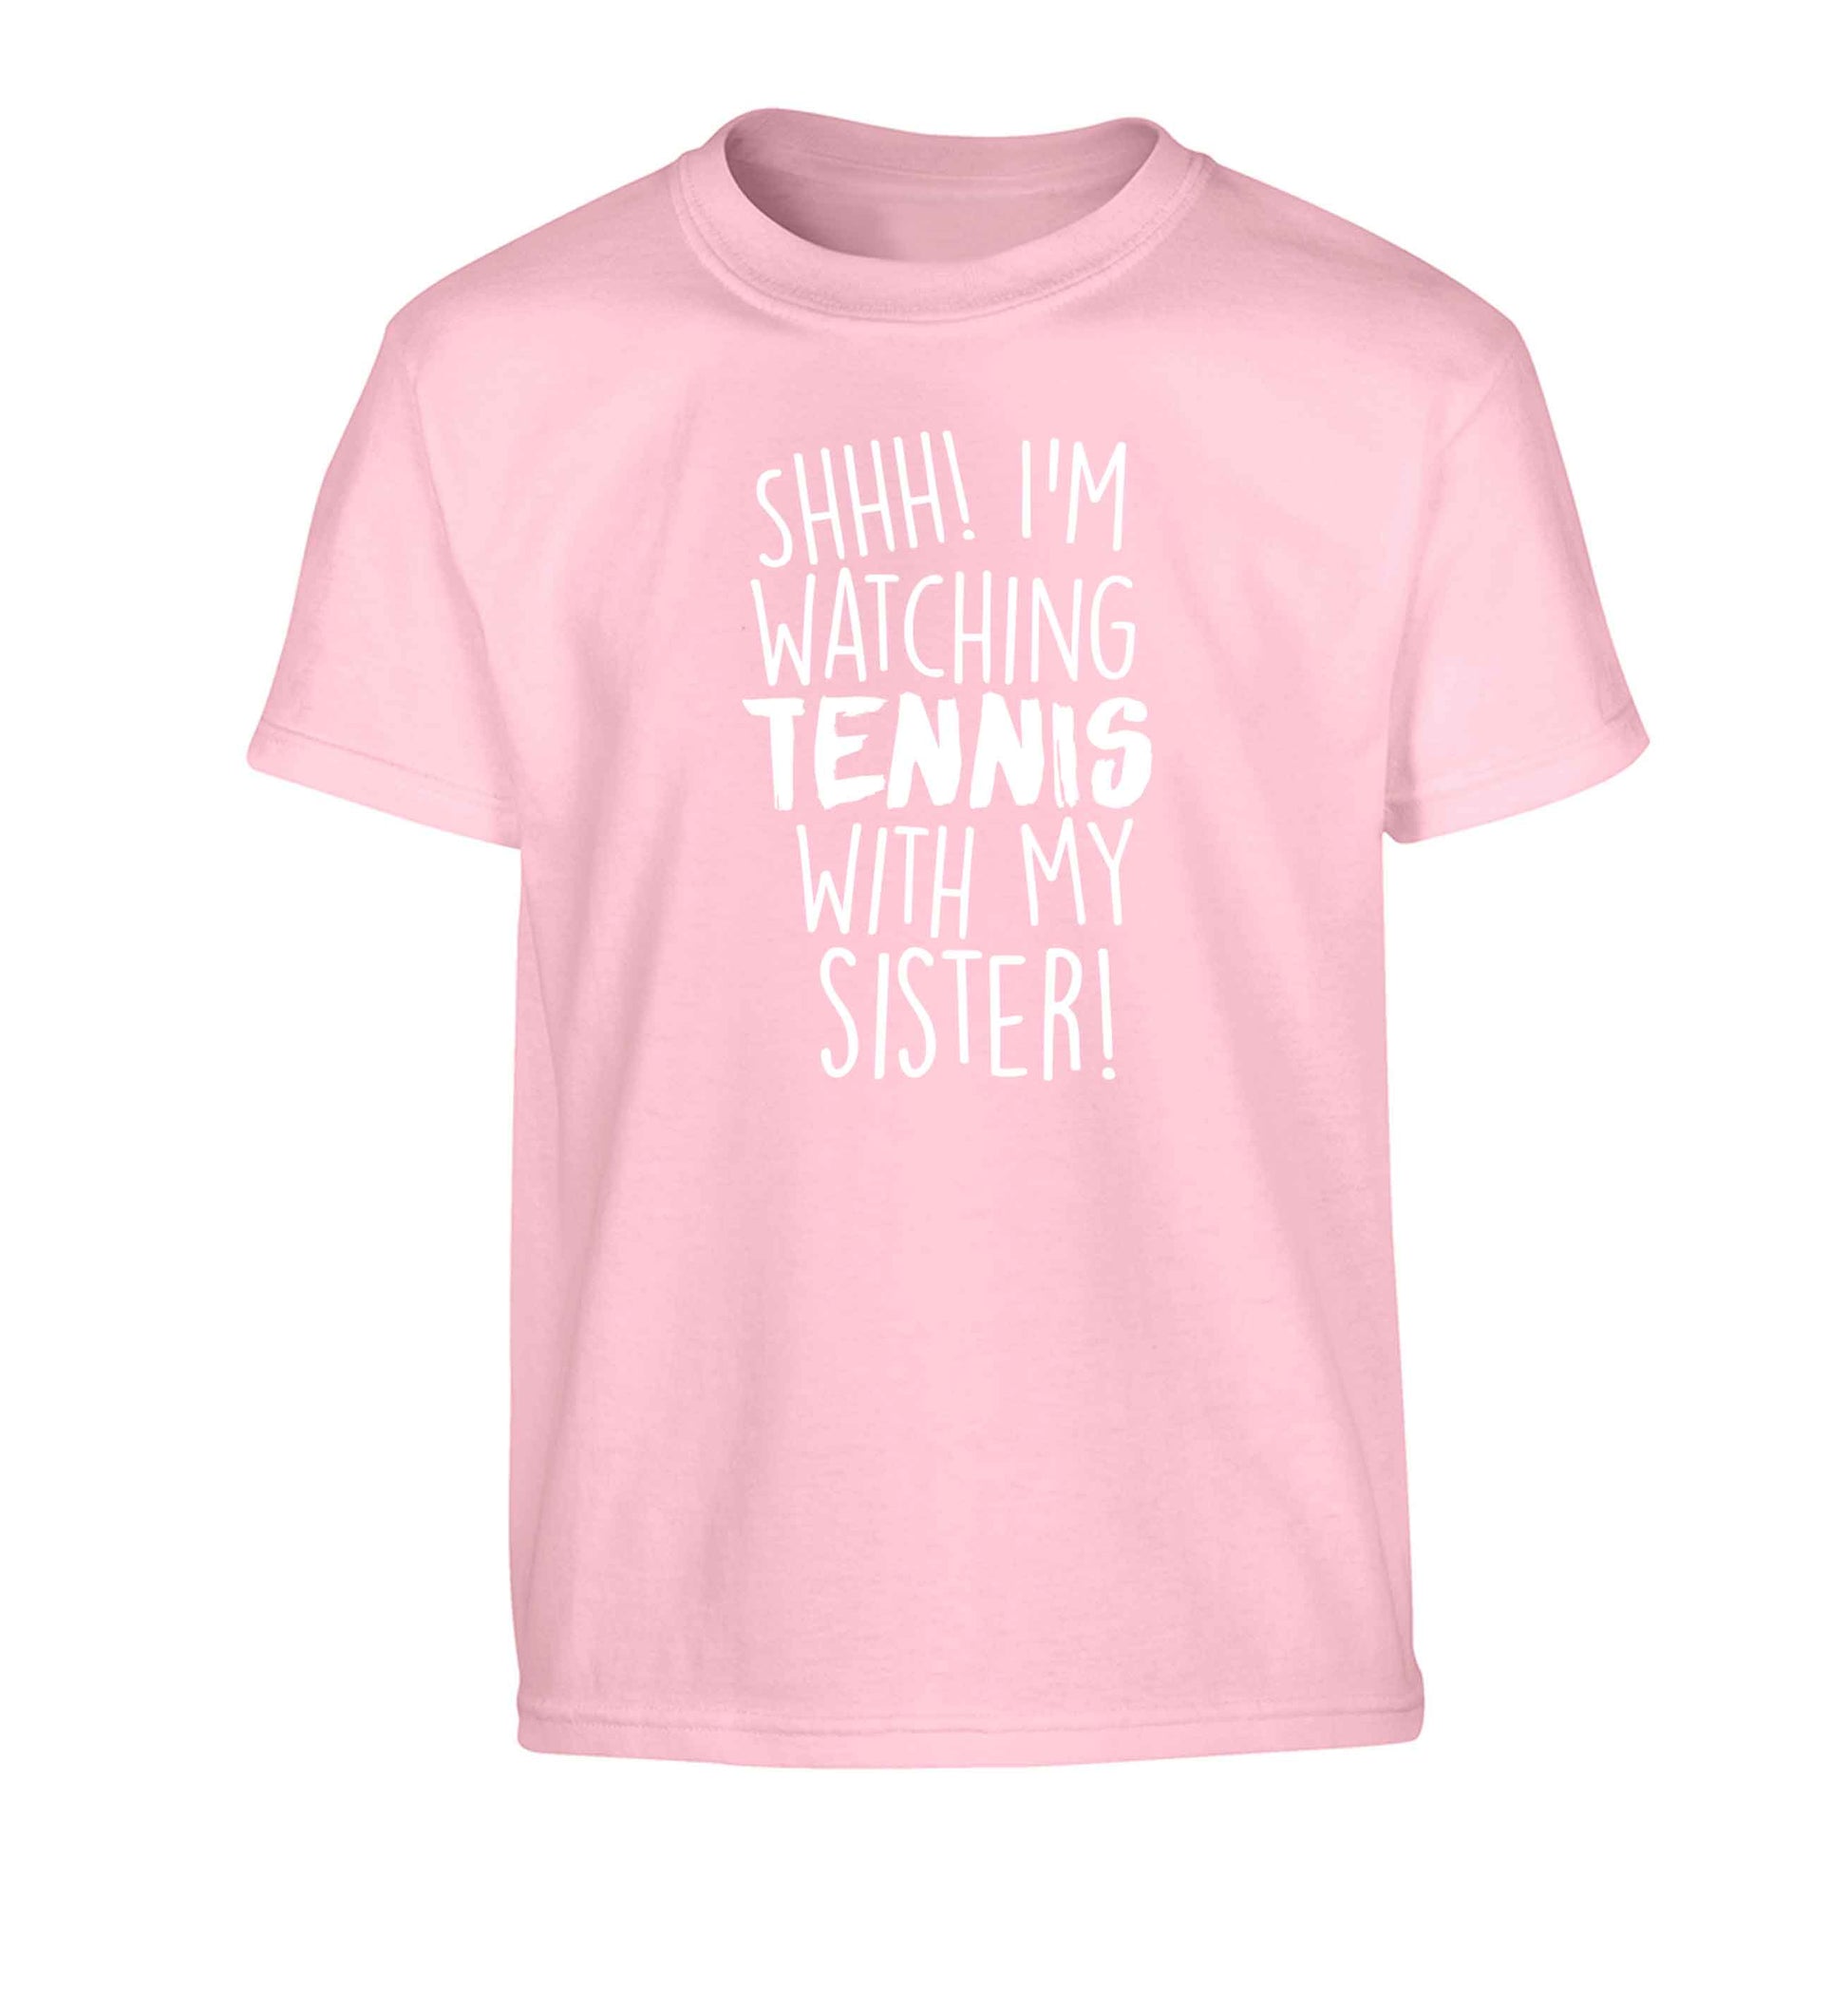 Shh! I'm watching tennis with my sister! Children's light pink Tshirt 12-13 Years